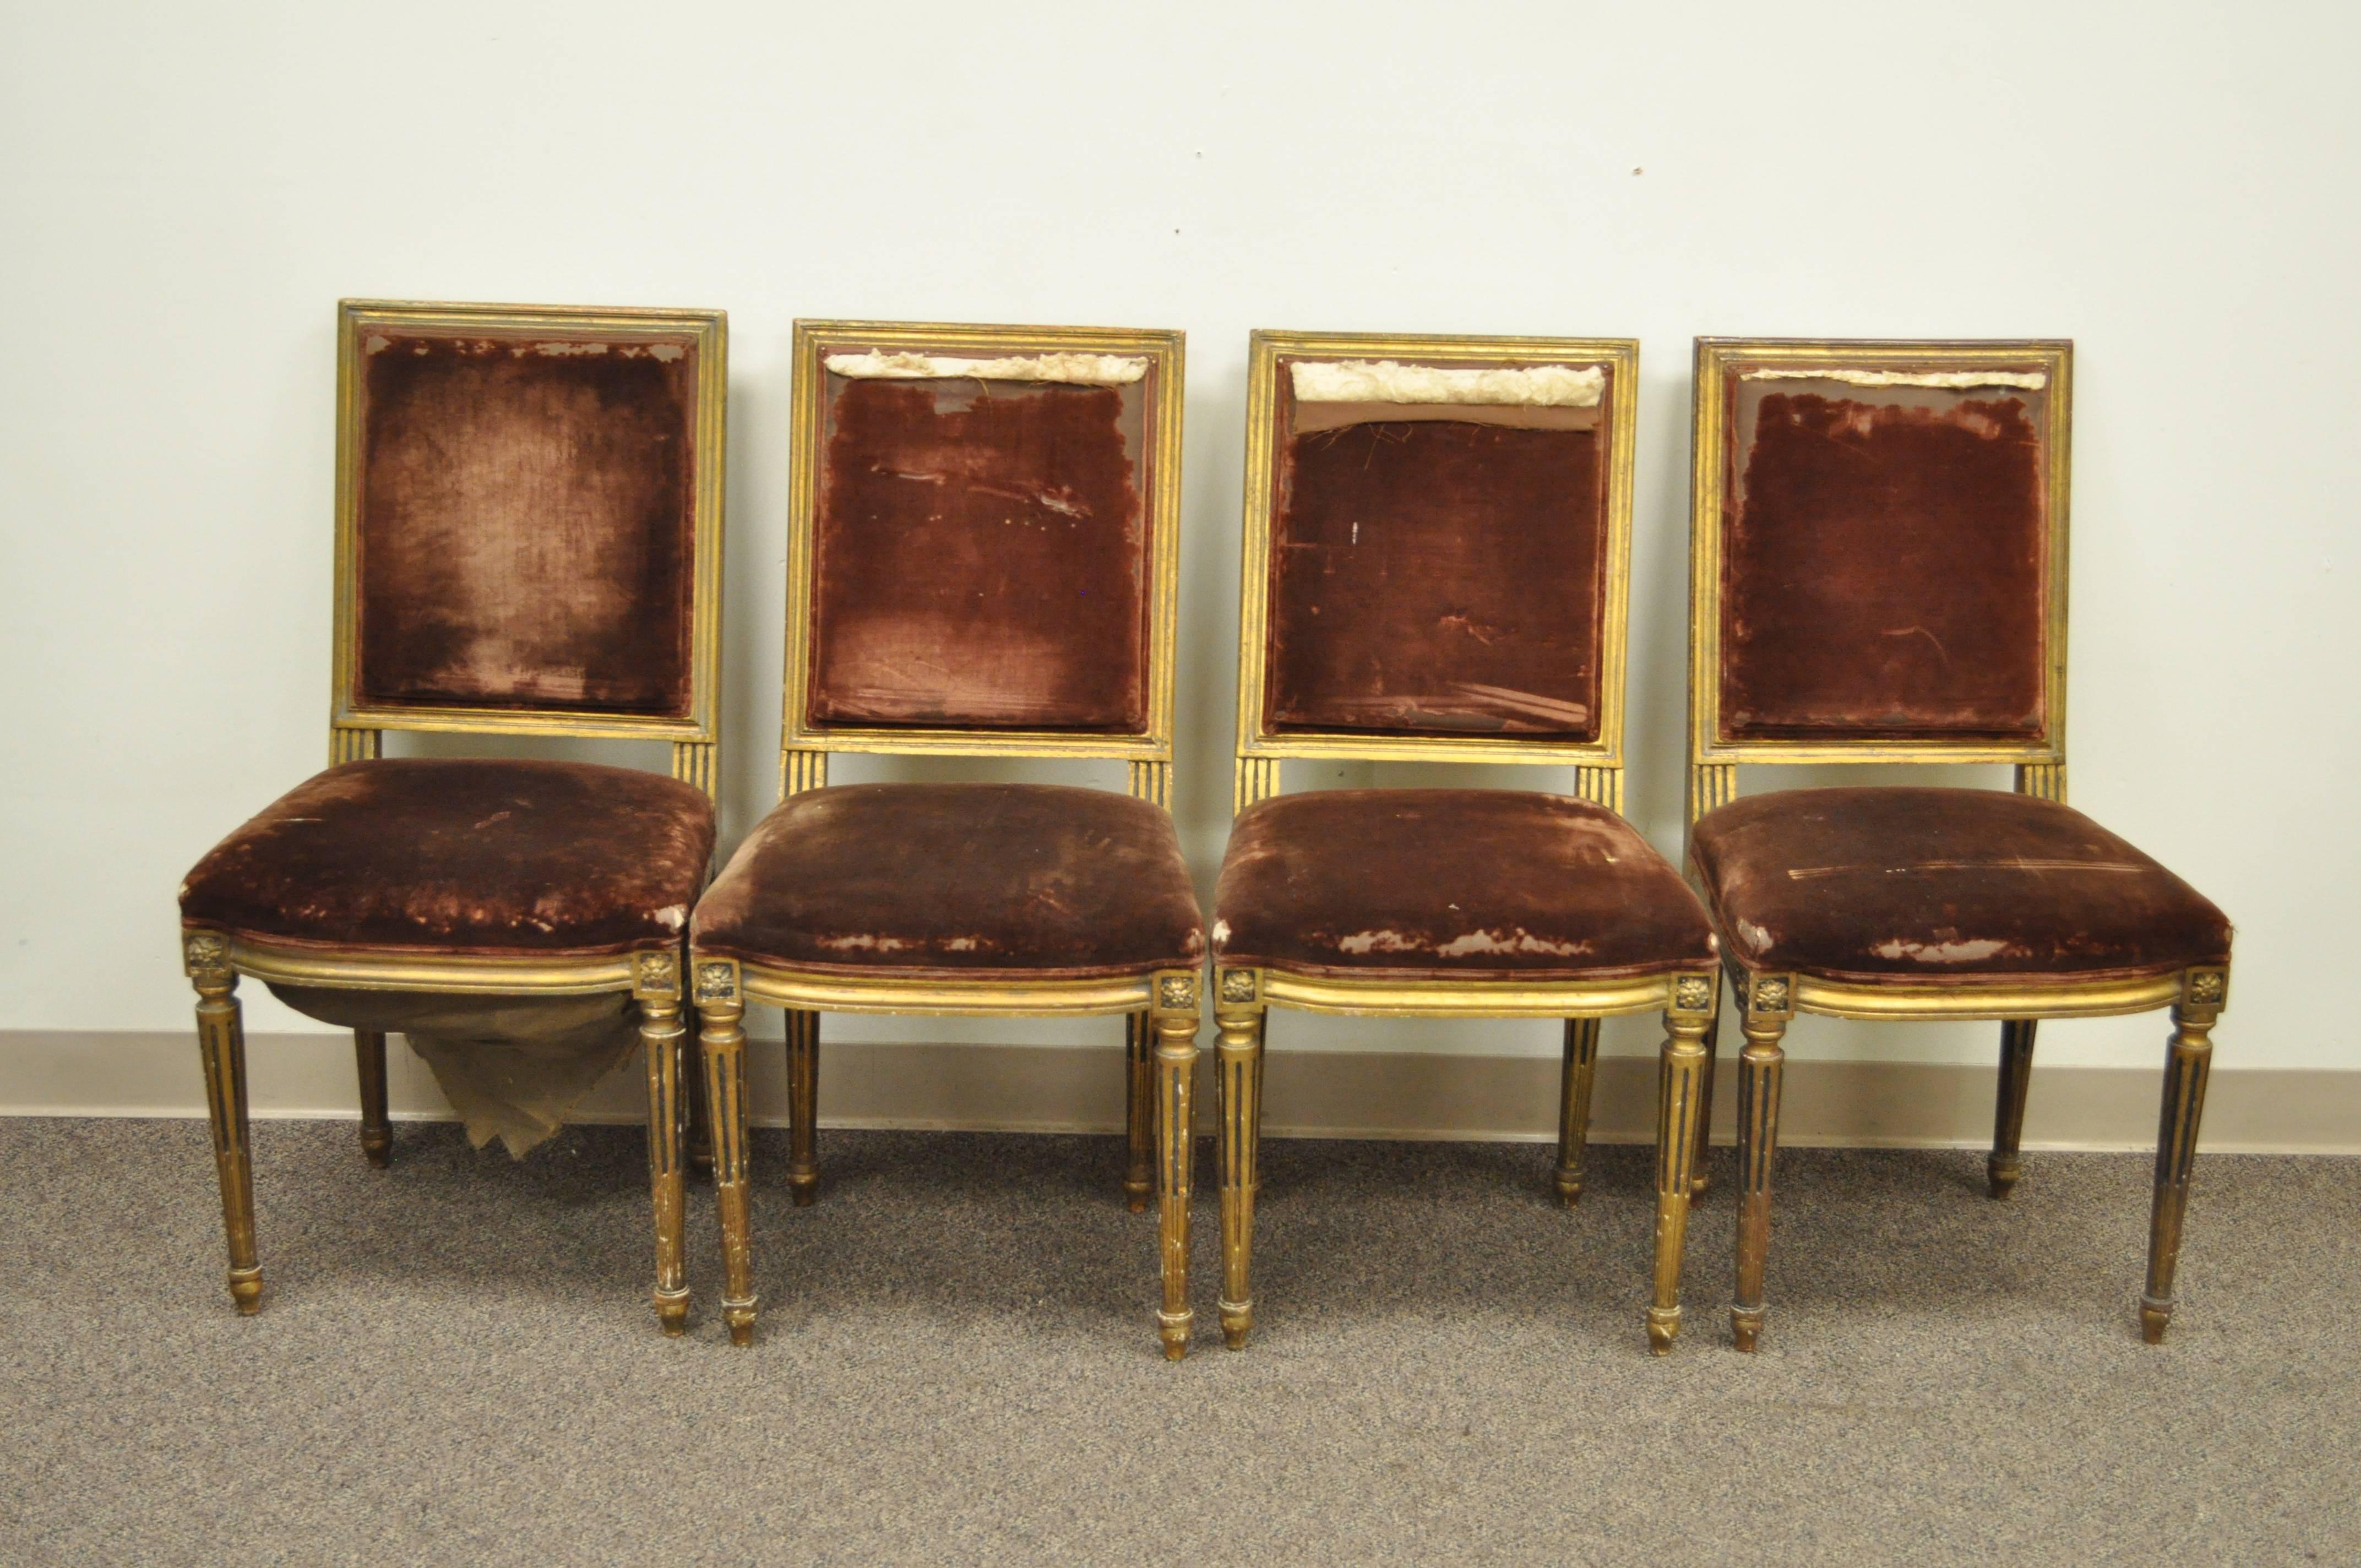 Set of four elegant French Louis XVI style giltwood dining chairs. These late 19th century French side chairs features reeded and tapered legs, square backs and Classic Louis XVI form. Original antique condition.